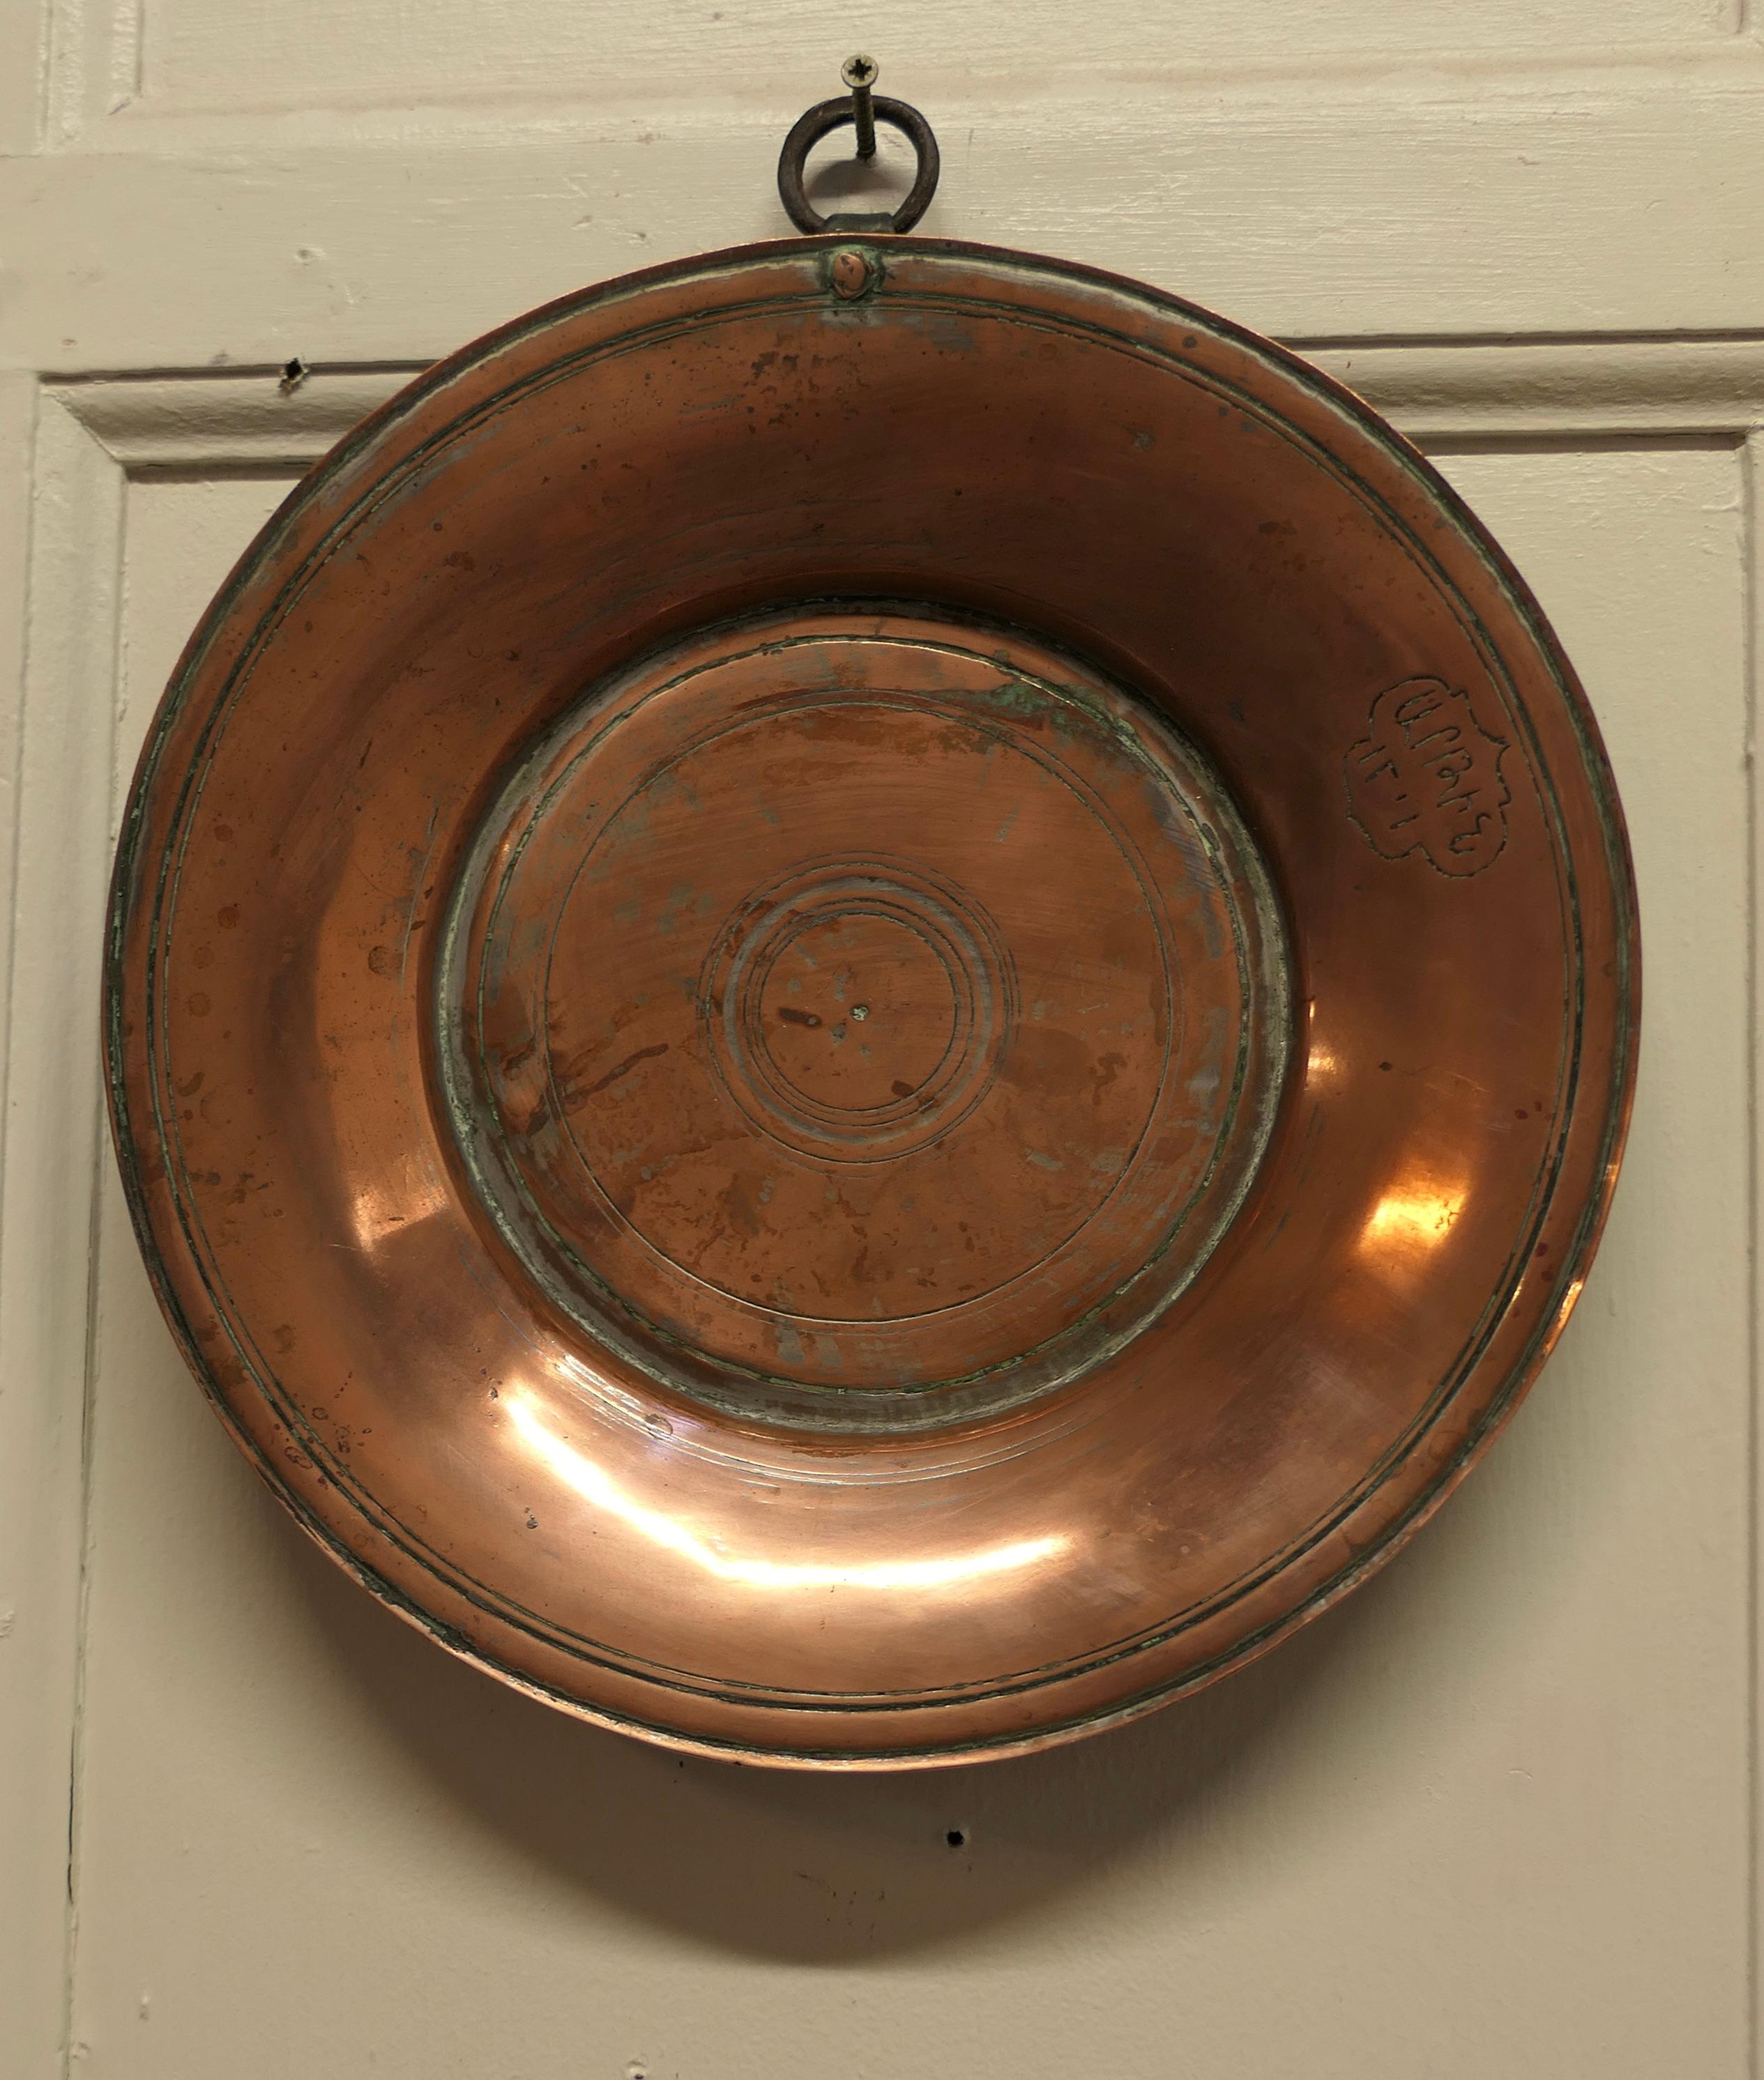 Heavy antique hand made copper plates

These are very heavy quality copper, they have thick bases and one has a hanging ring.
These were made in Asia in the 19th Century 
The large dish is 13” in diameter an the smaller is 10” in diameter